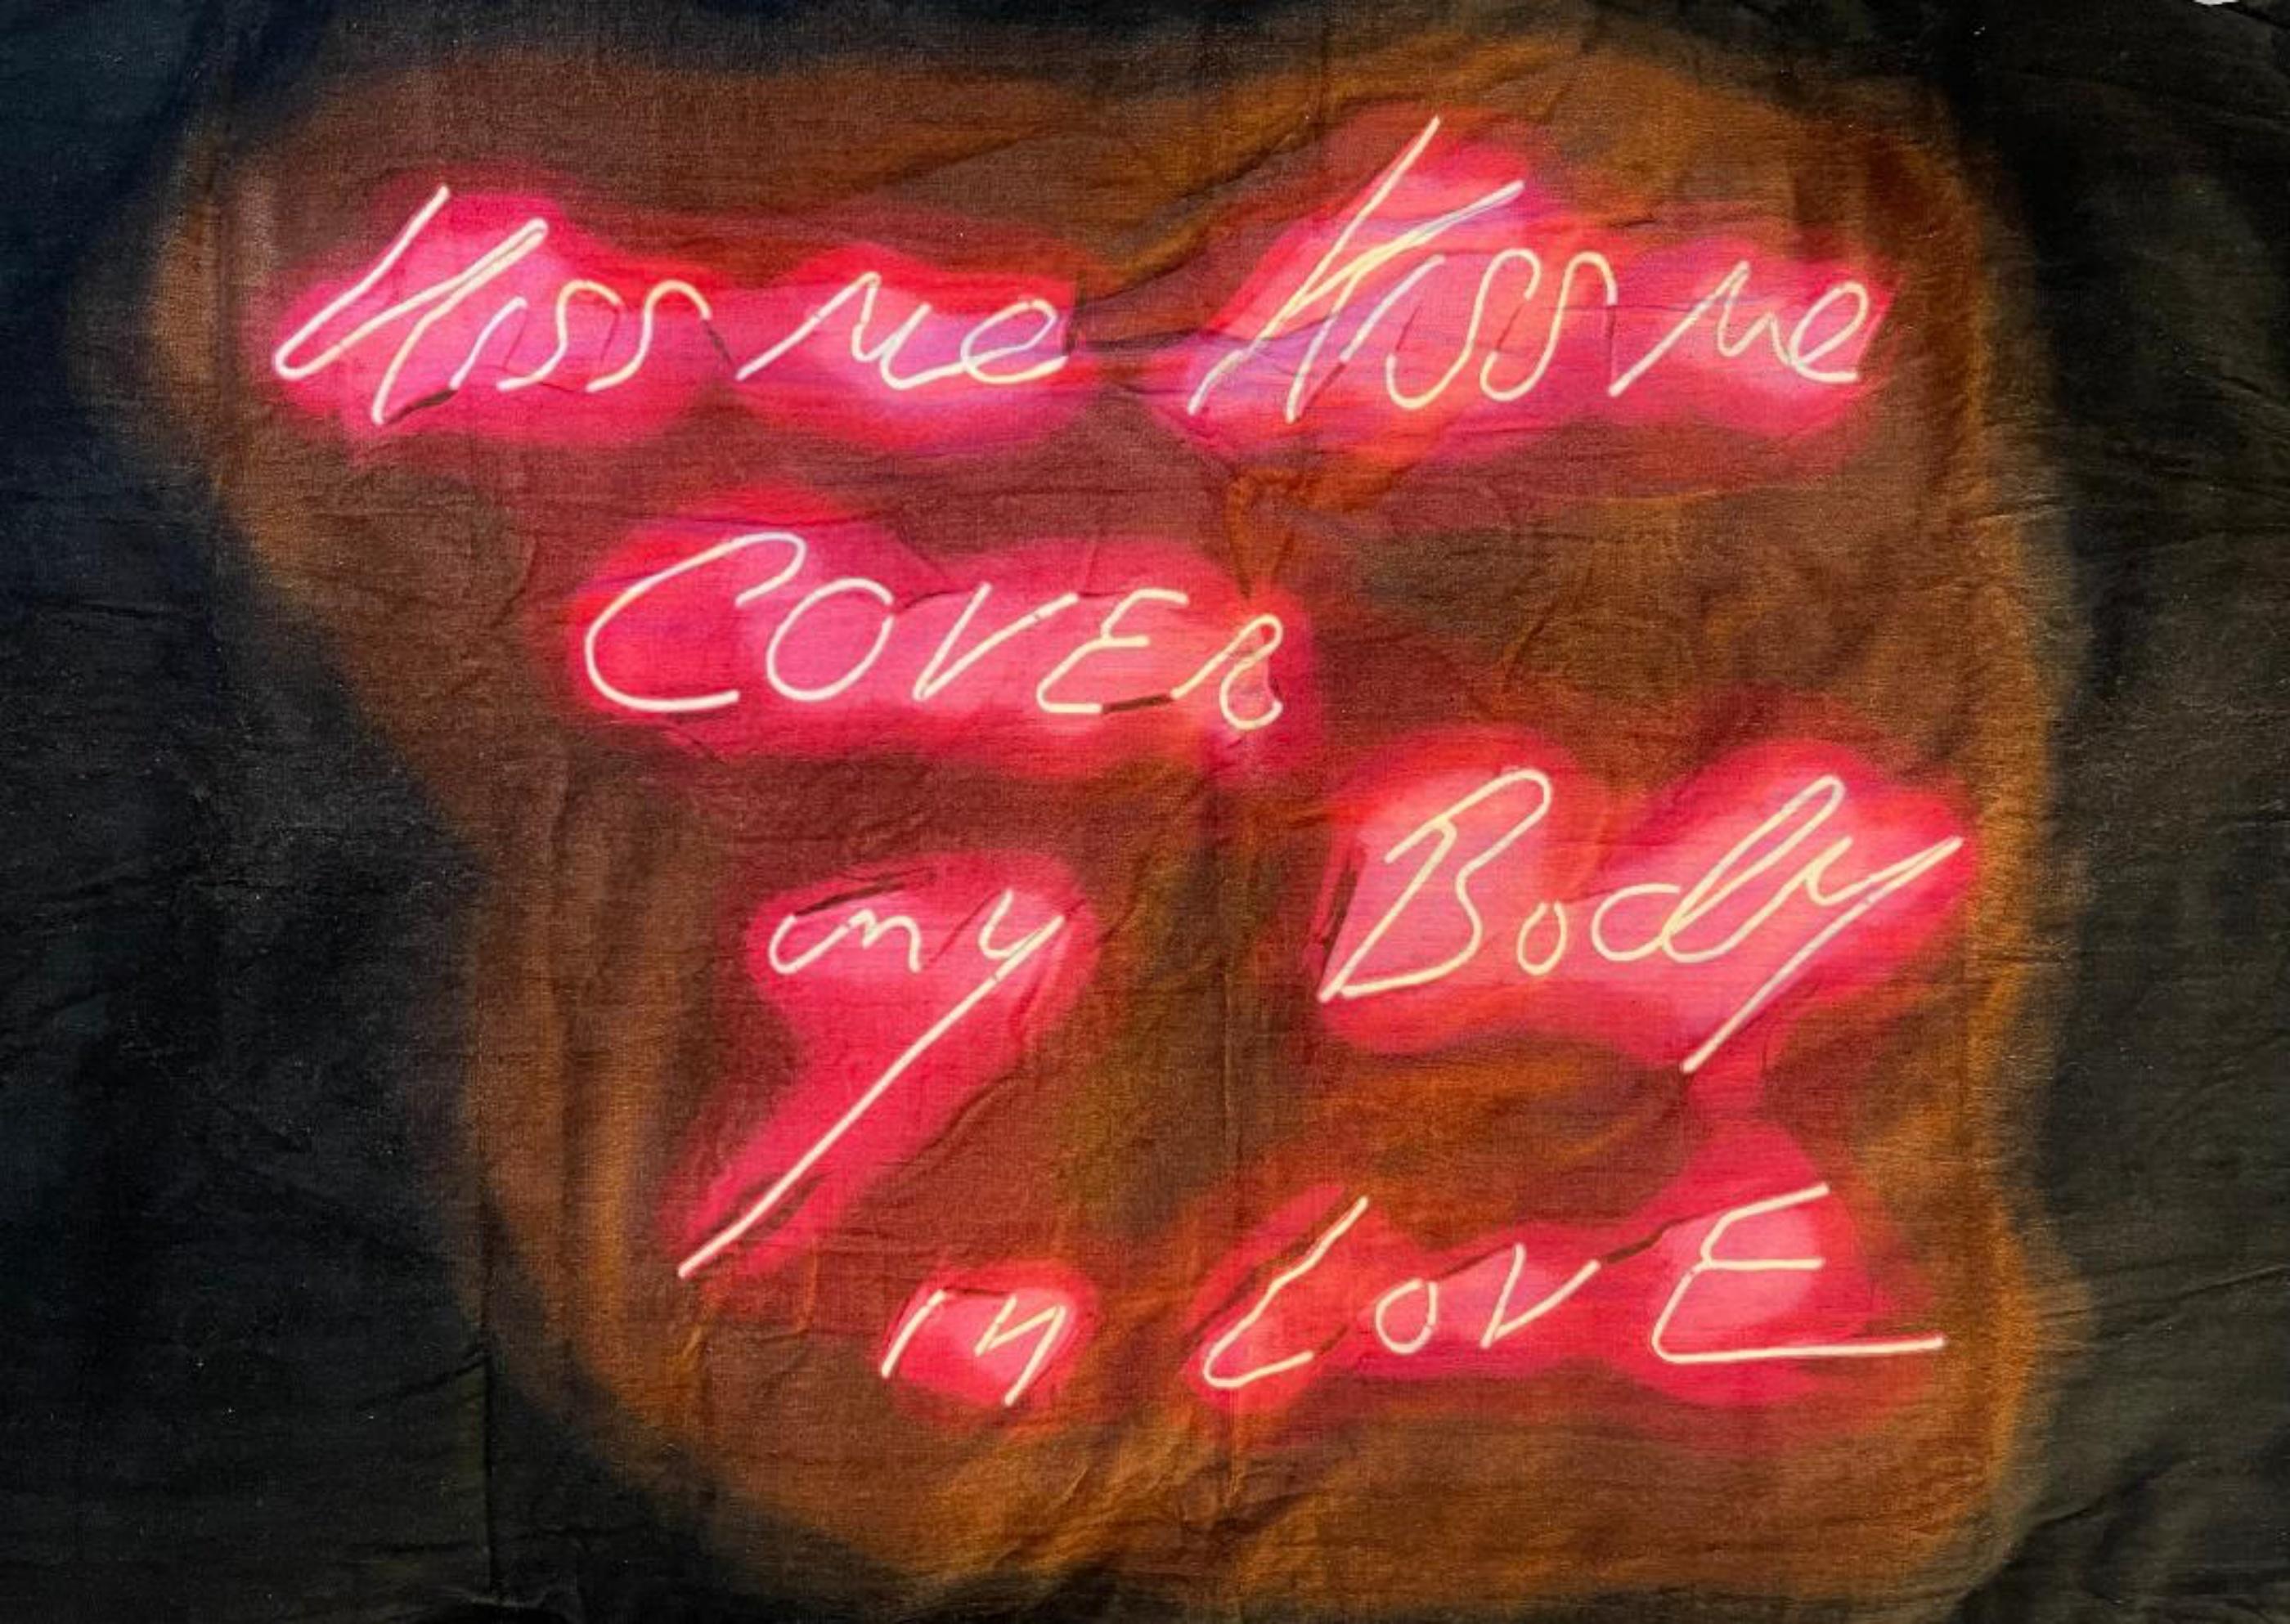 Tracey Emin Figurative Print - Kiss Me Towel, Limited Ed. of 1000, hand numbered LARGE 42" x 69" + official COA